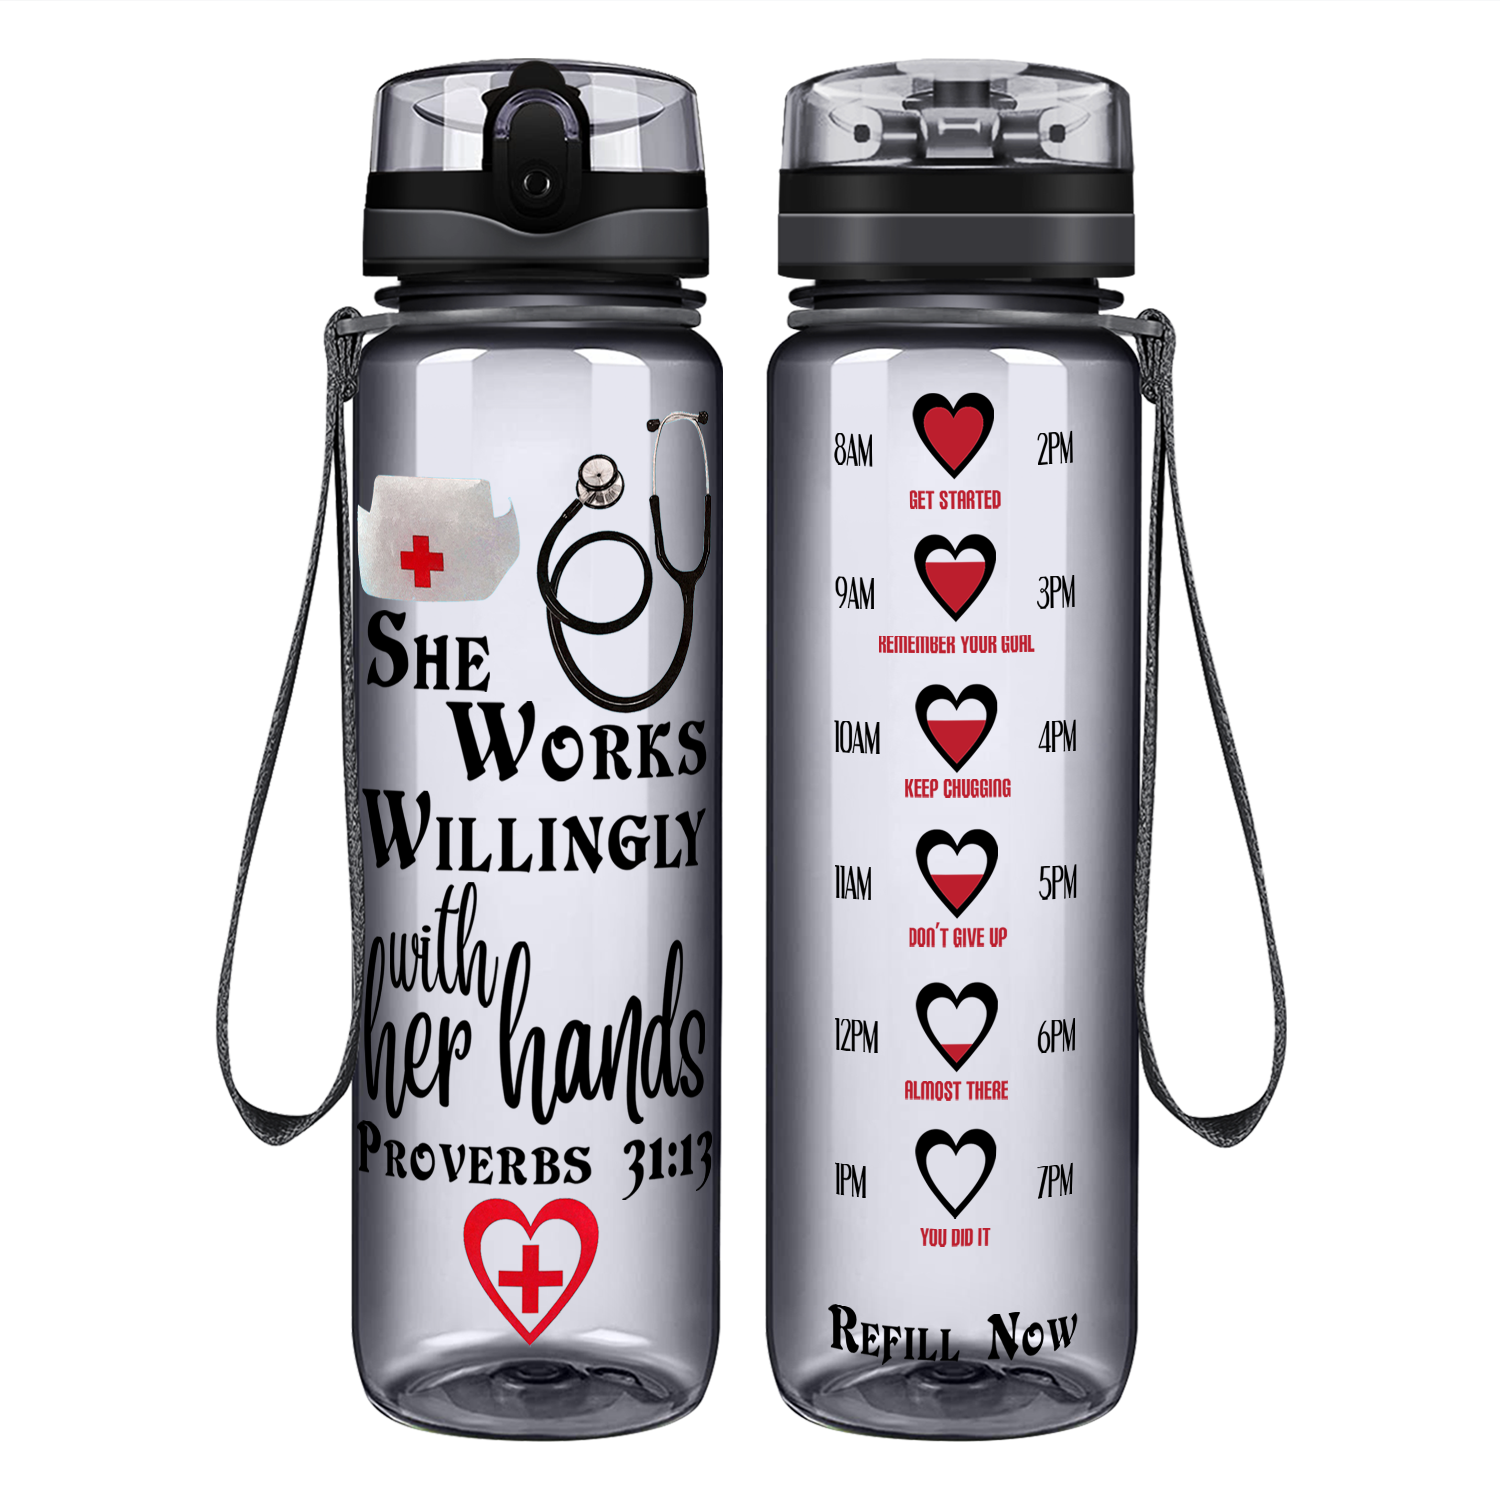 She Works Willingly with Her Hands on 32oz Motivational Nurse Water Bottle